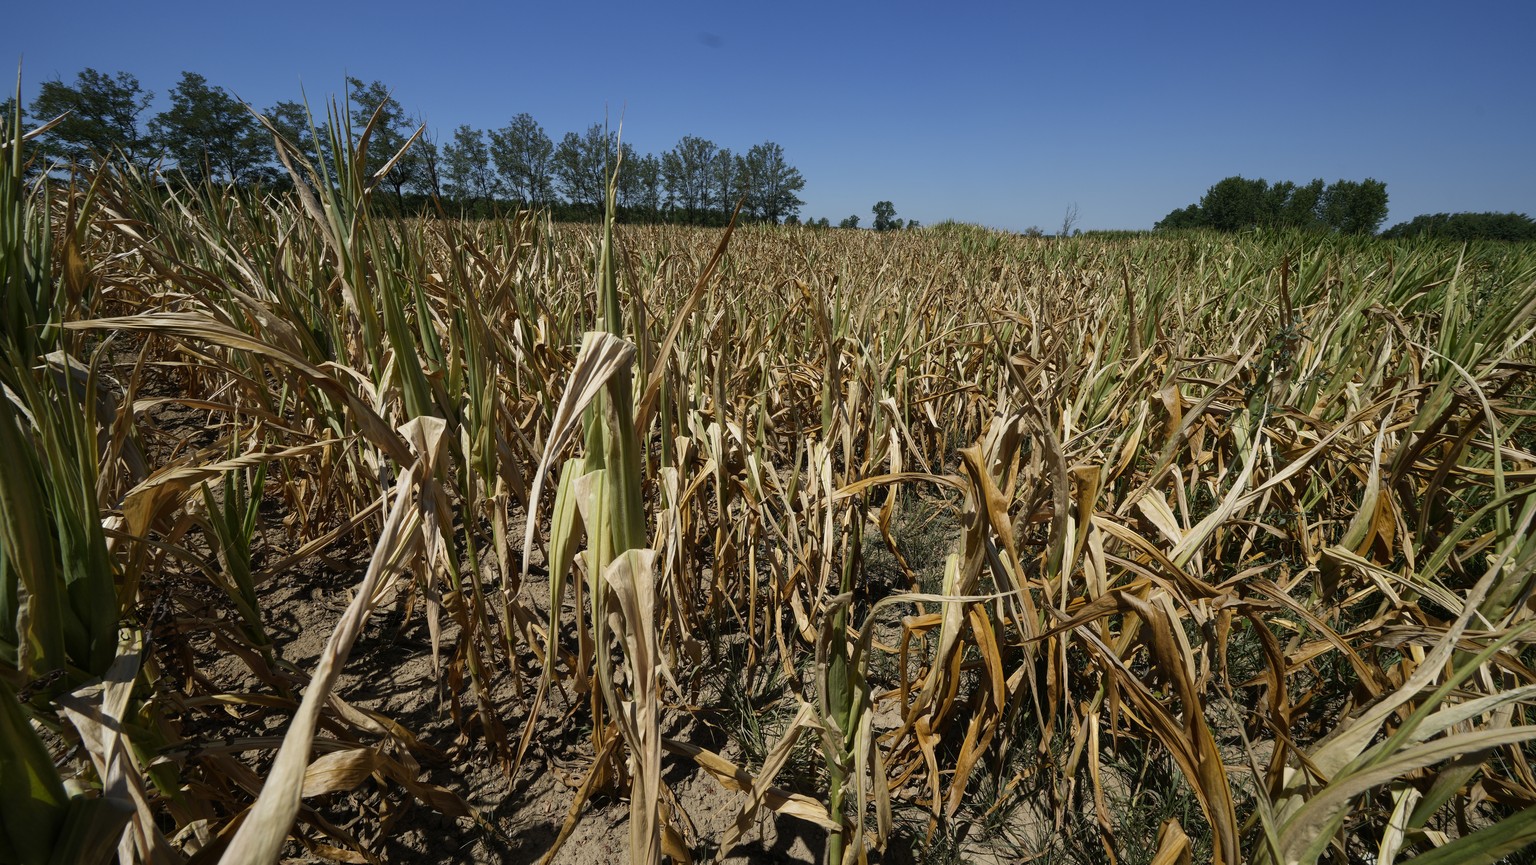 Dry out crops are seen in Bereguardo, 25 kilometres southwest of Milan in northern Italy, Friday, July 8, 2022. The Italian government declared a state of emergency early this week for much of the rai ...